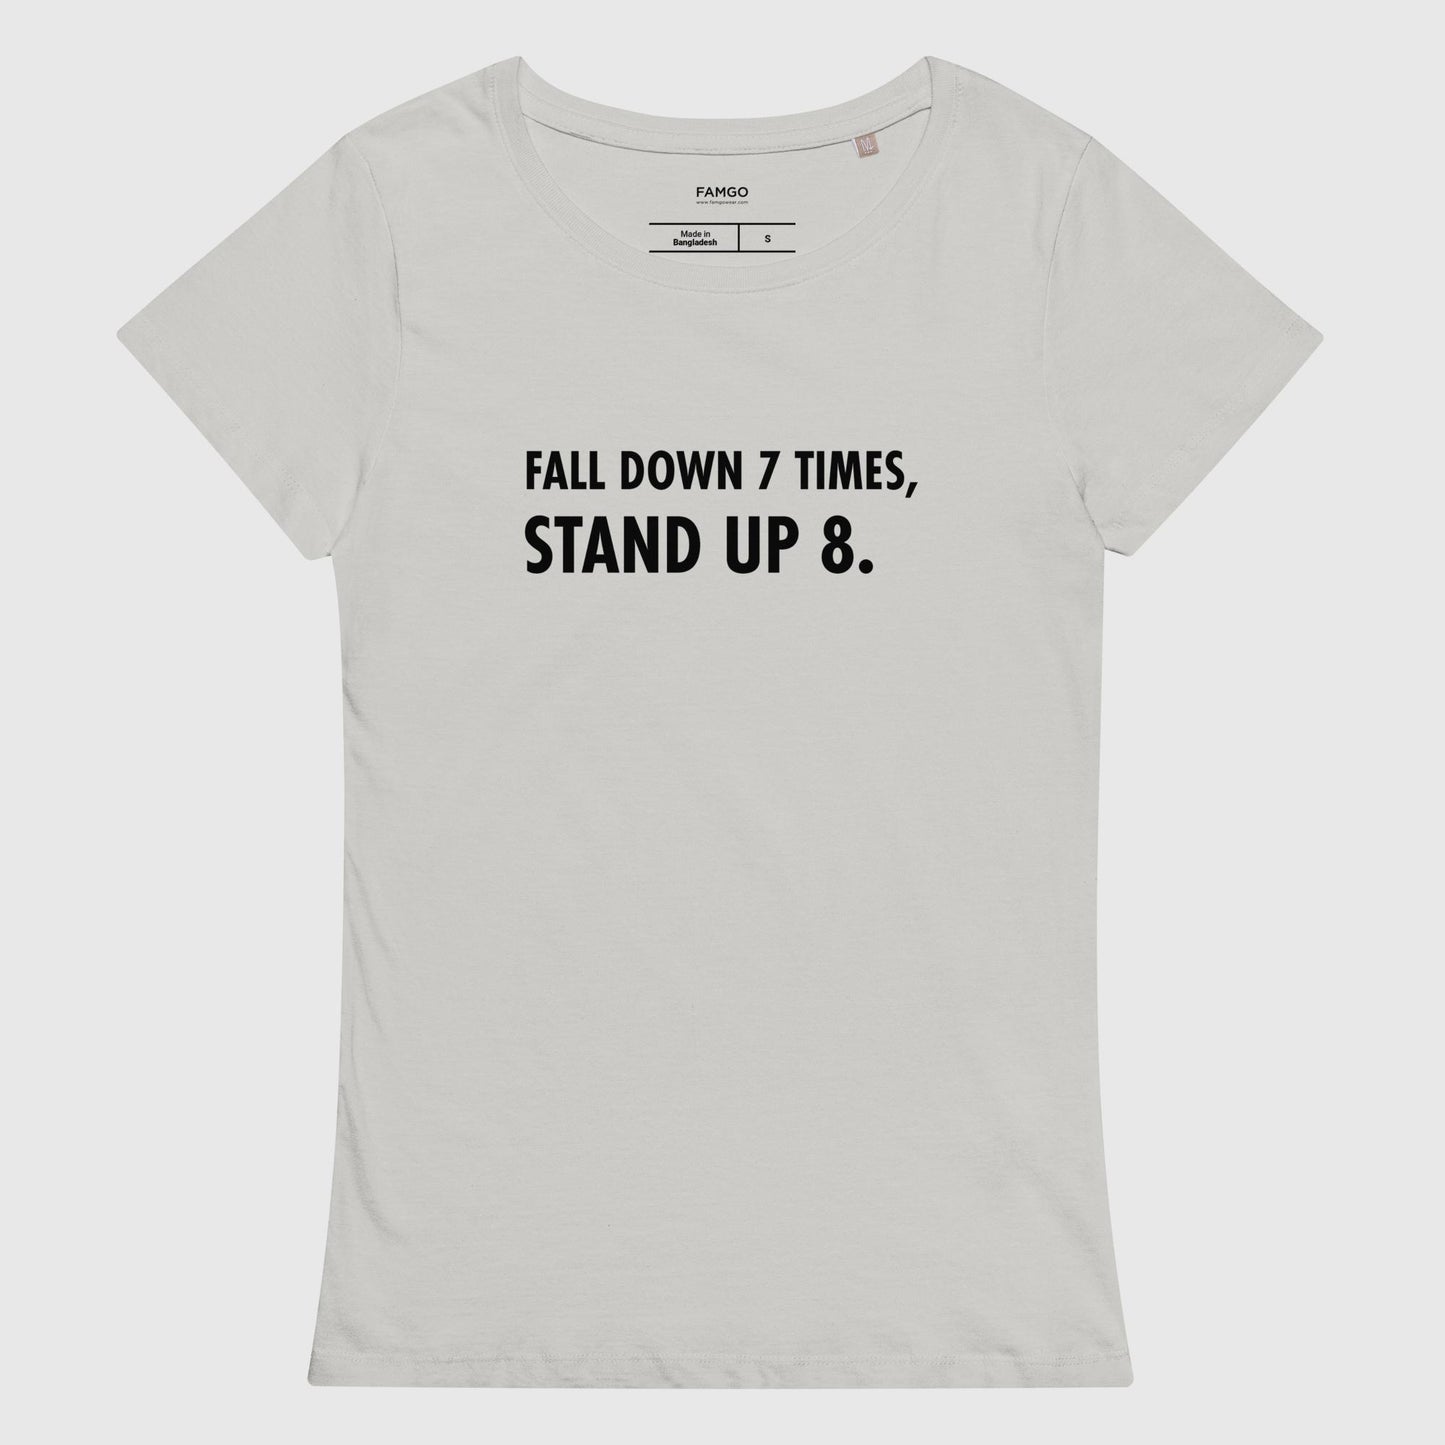 Women's pure gray organic cotton t-shirt that features the Japanese proverb, "Fall Down 7 Times, Stand Up 8."